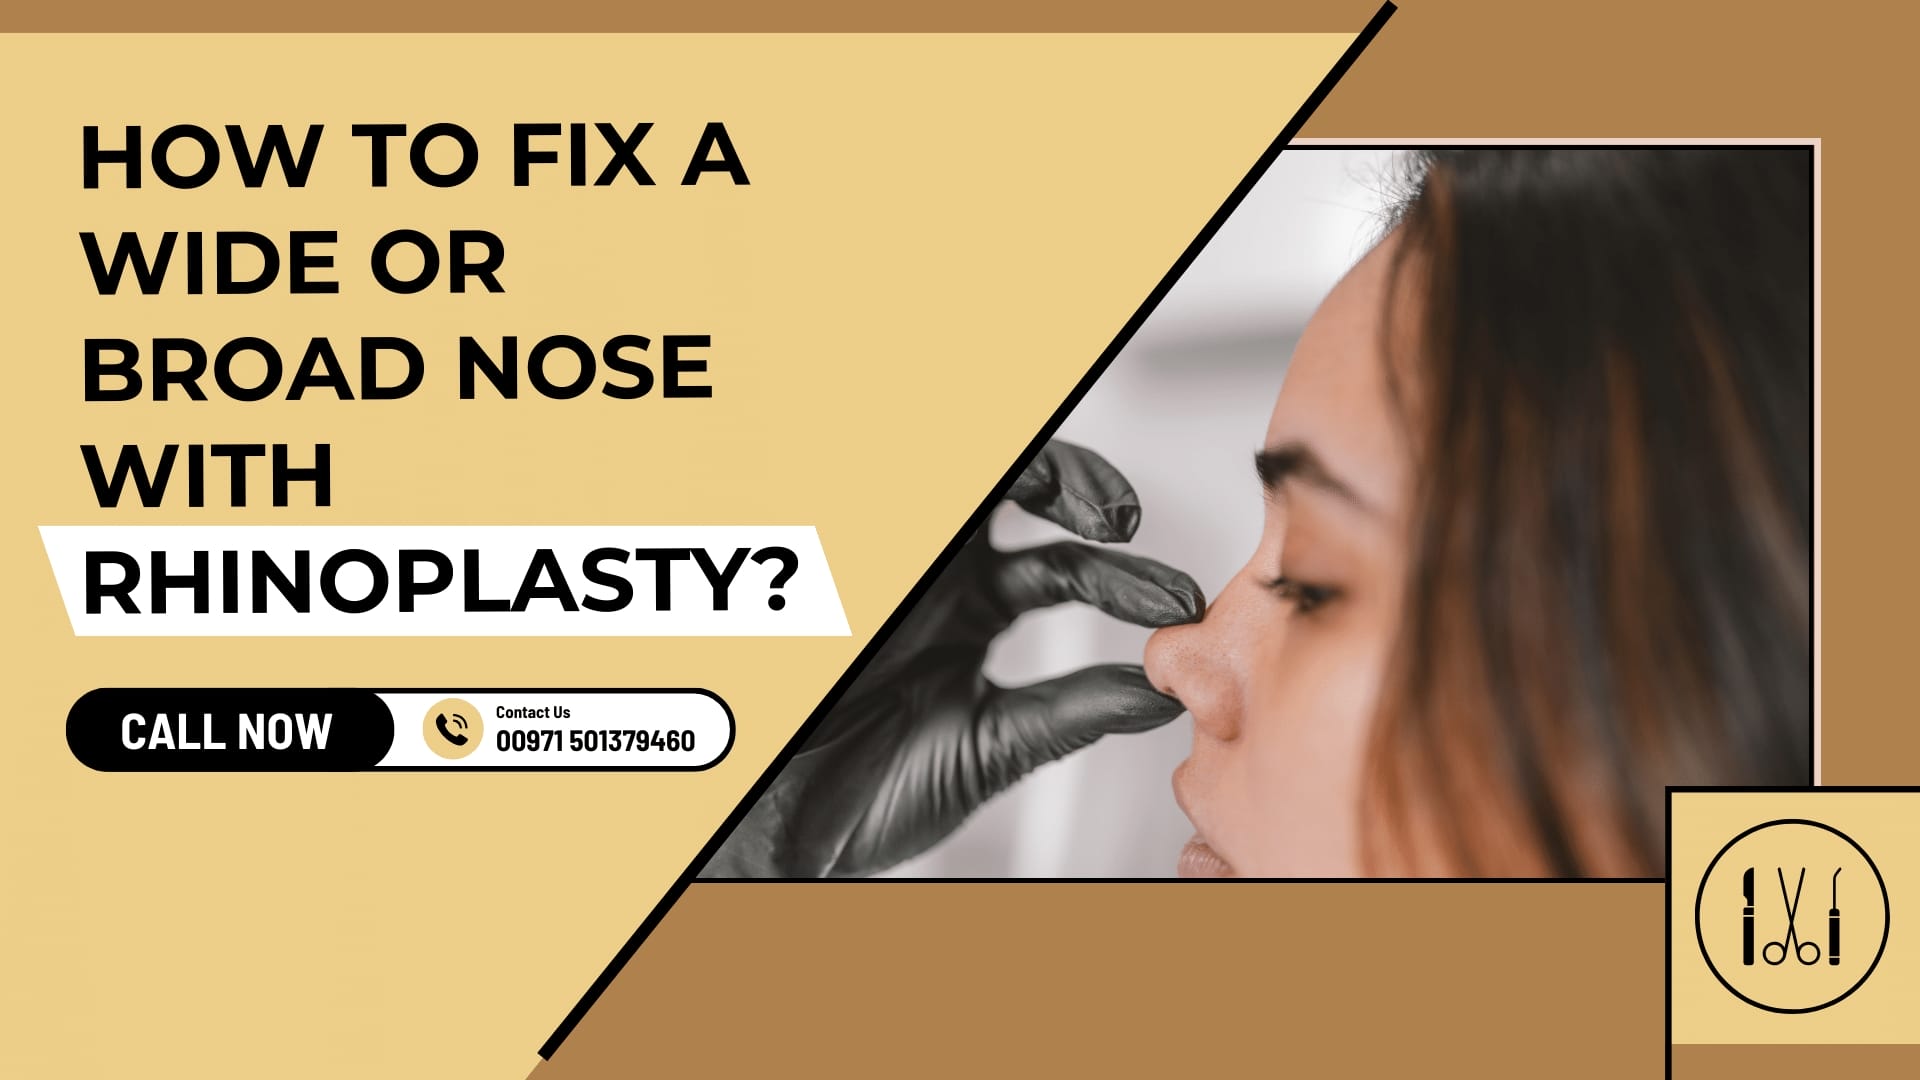 How To Fix A Wide Or Broad Nose With Rhinoplasty?